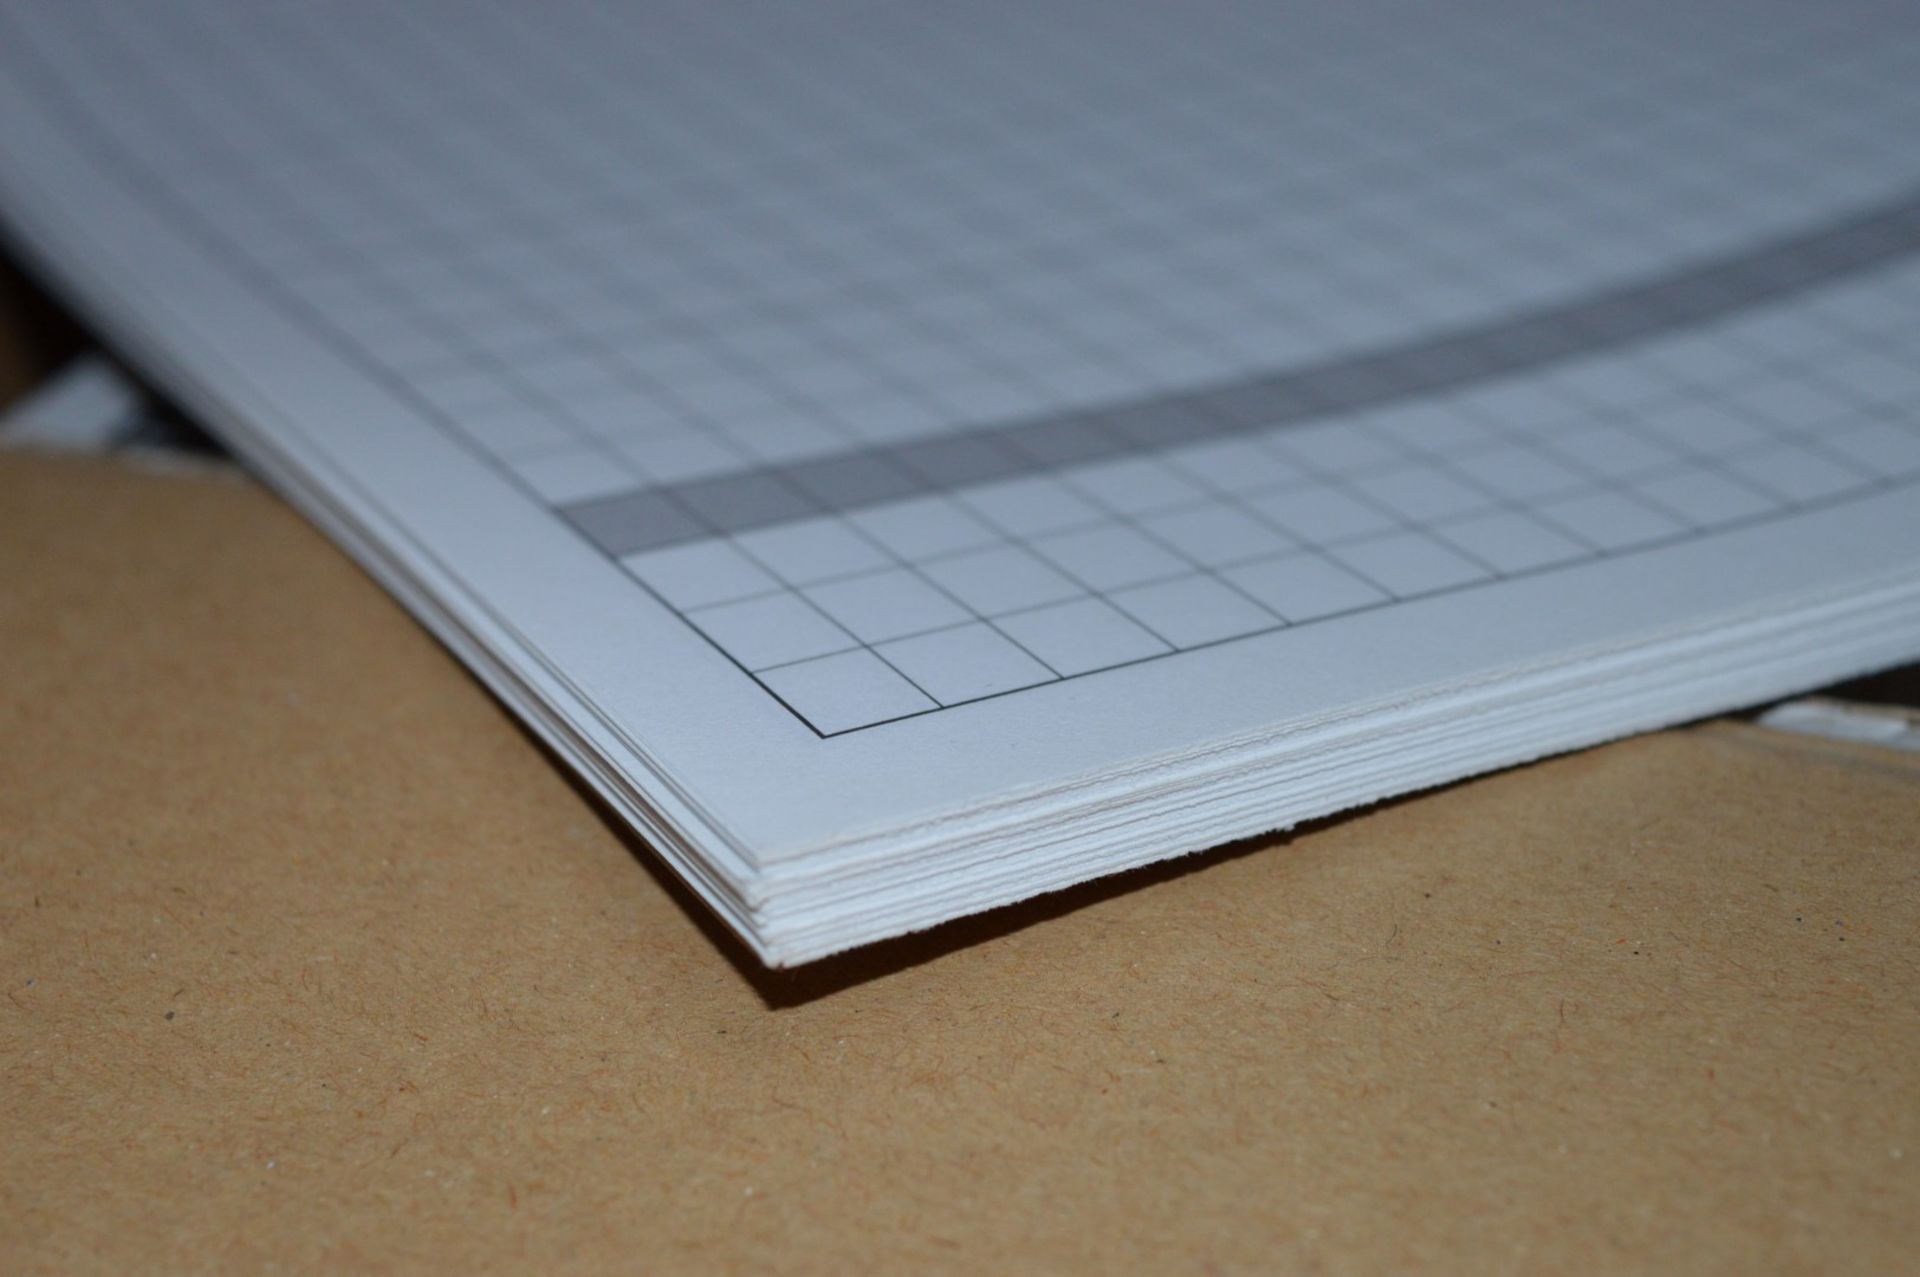 900 x A4 Size Staff Planners - Includes 18 Books of 50 Sheets - New Stock - CL011 - Ref JP024 - - Image 2 of 3